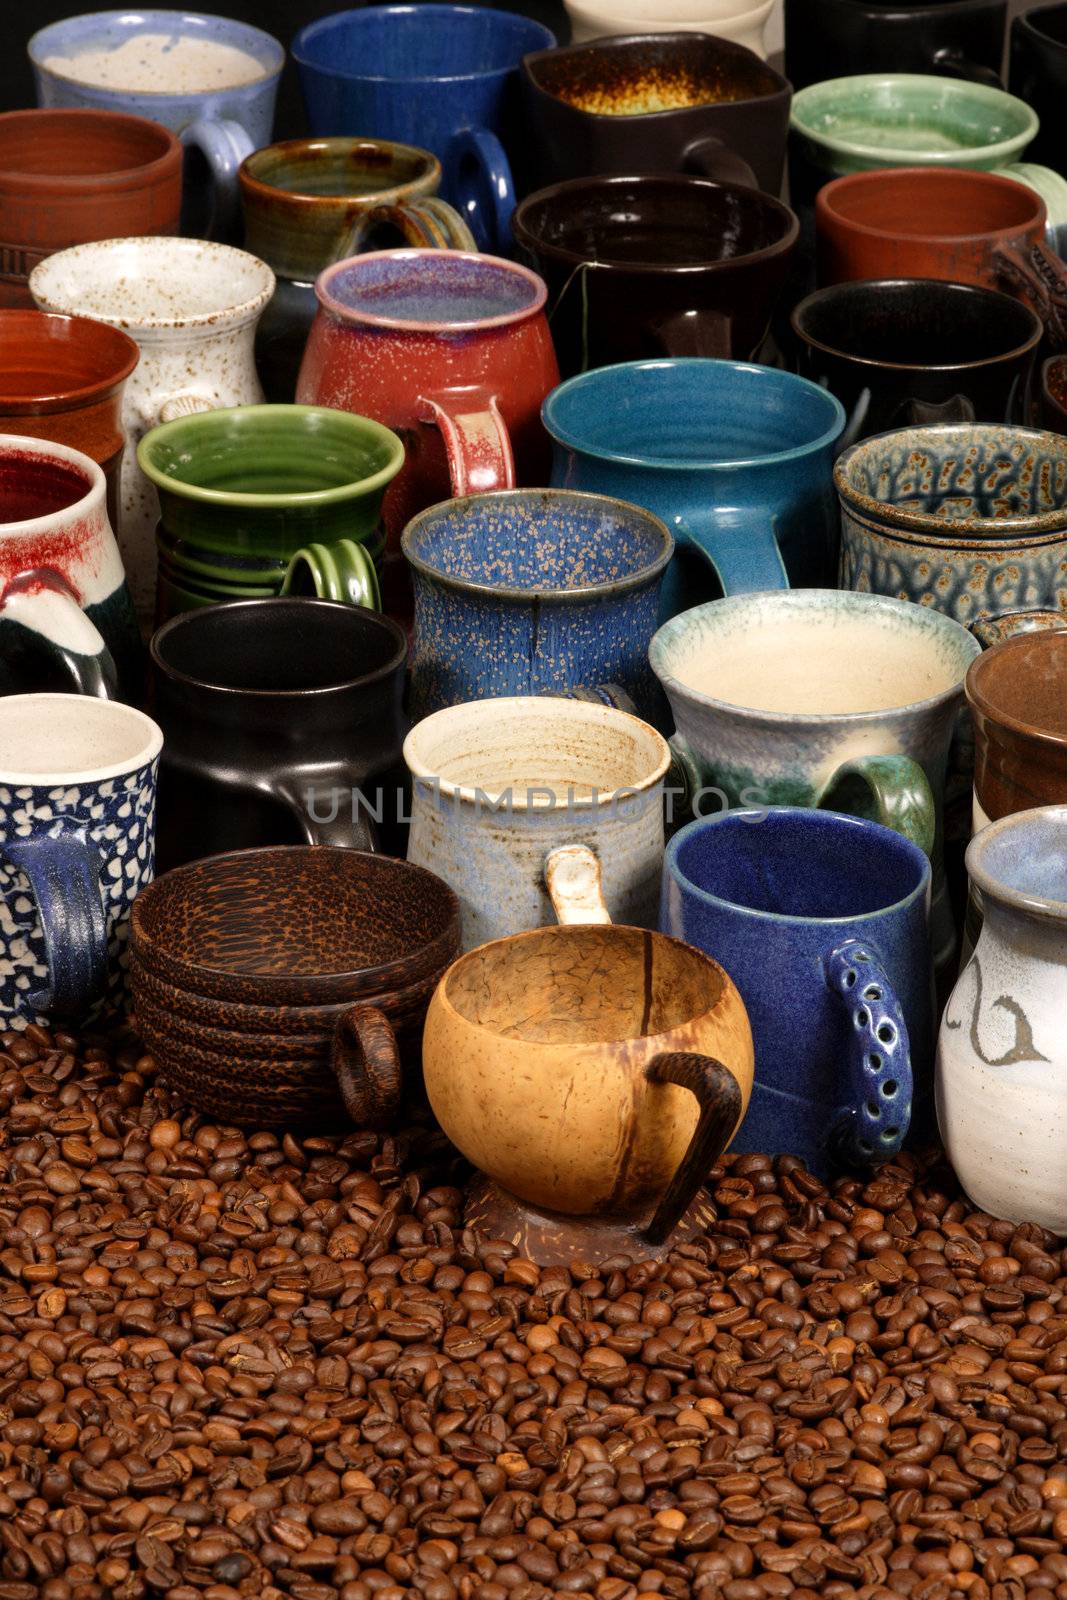 A collection of ceramic coffee mugs filled with different coffee - background image for coffee establishments.
